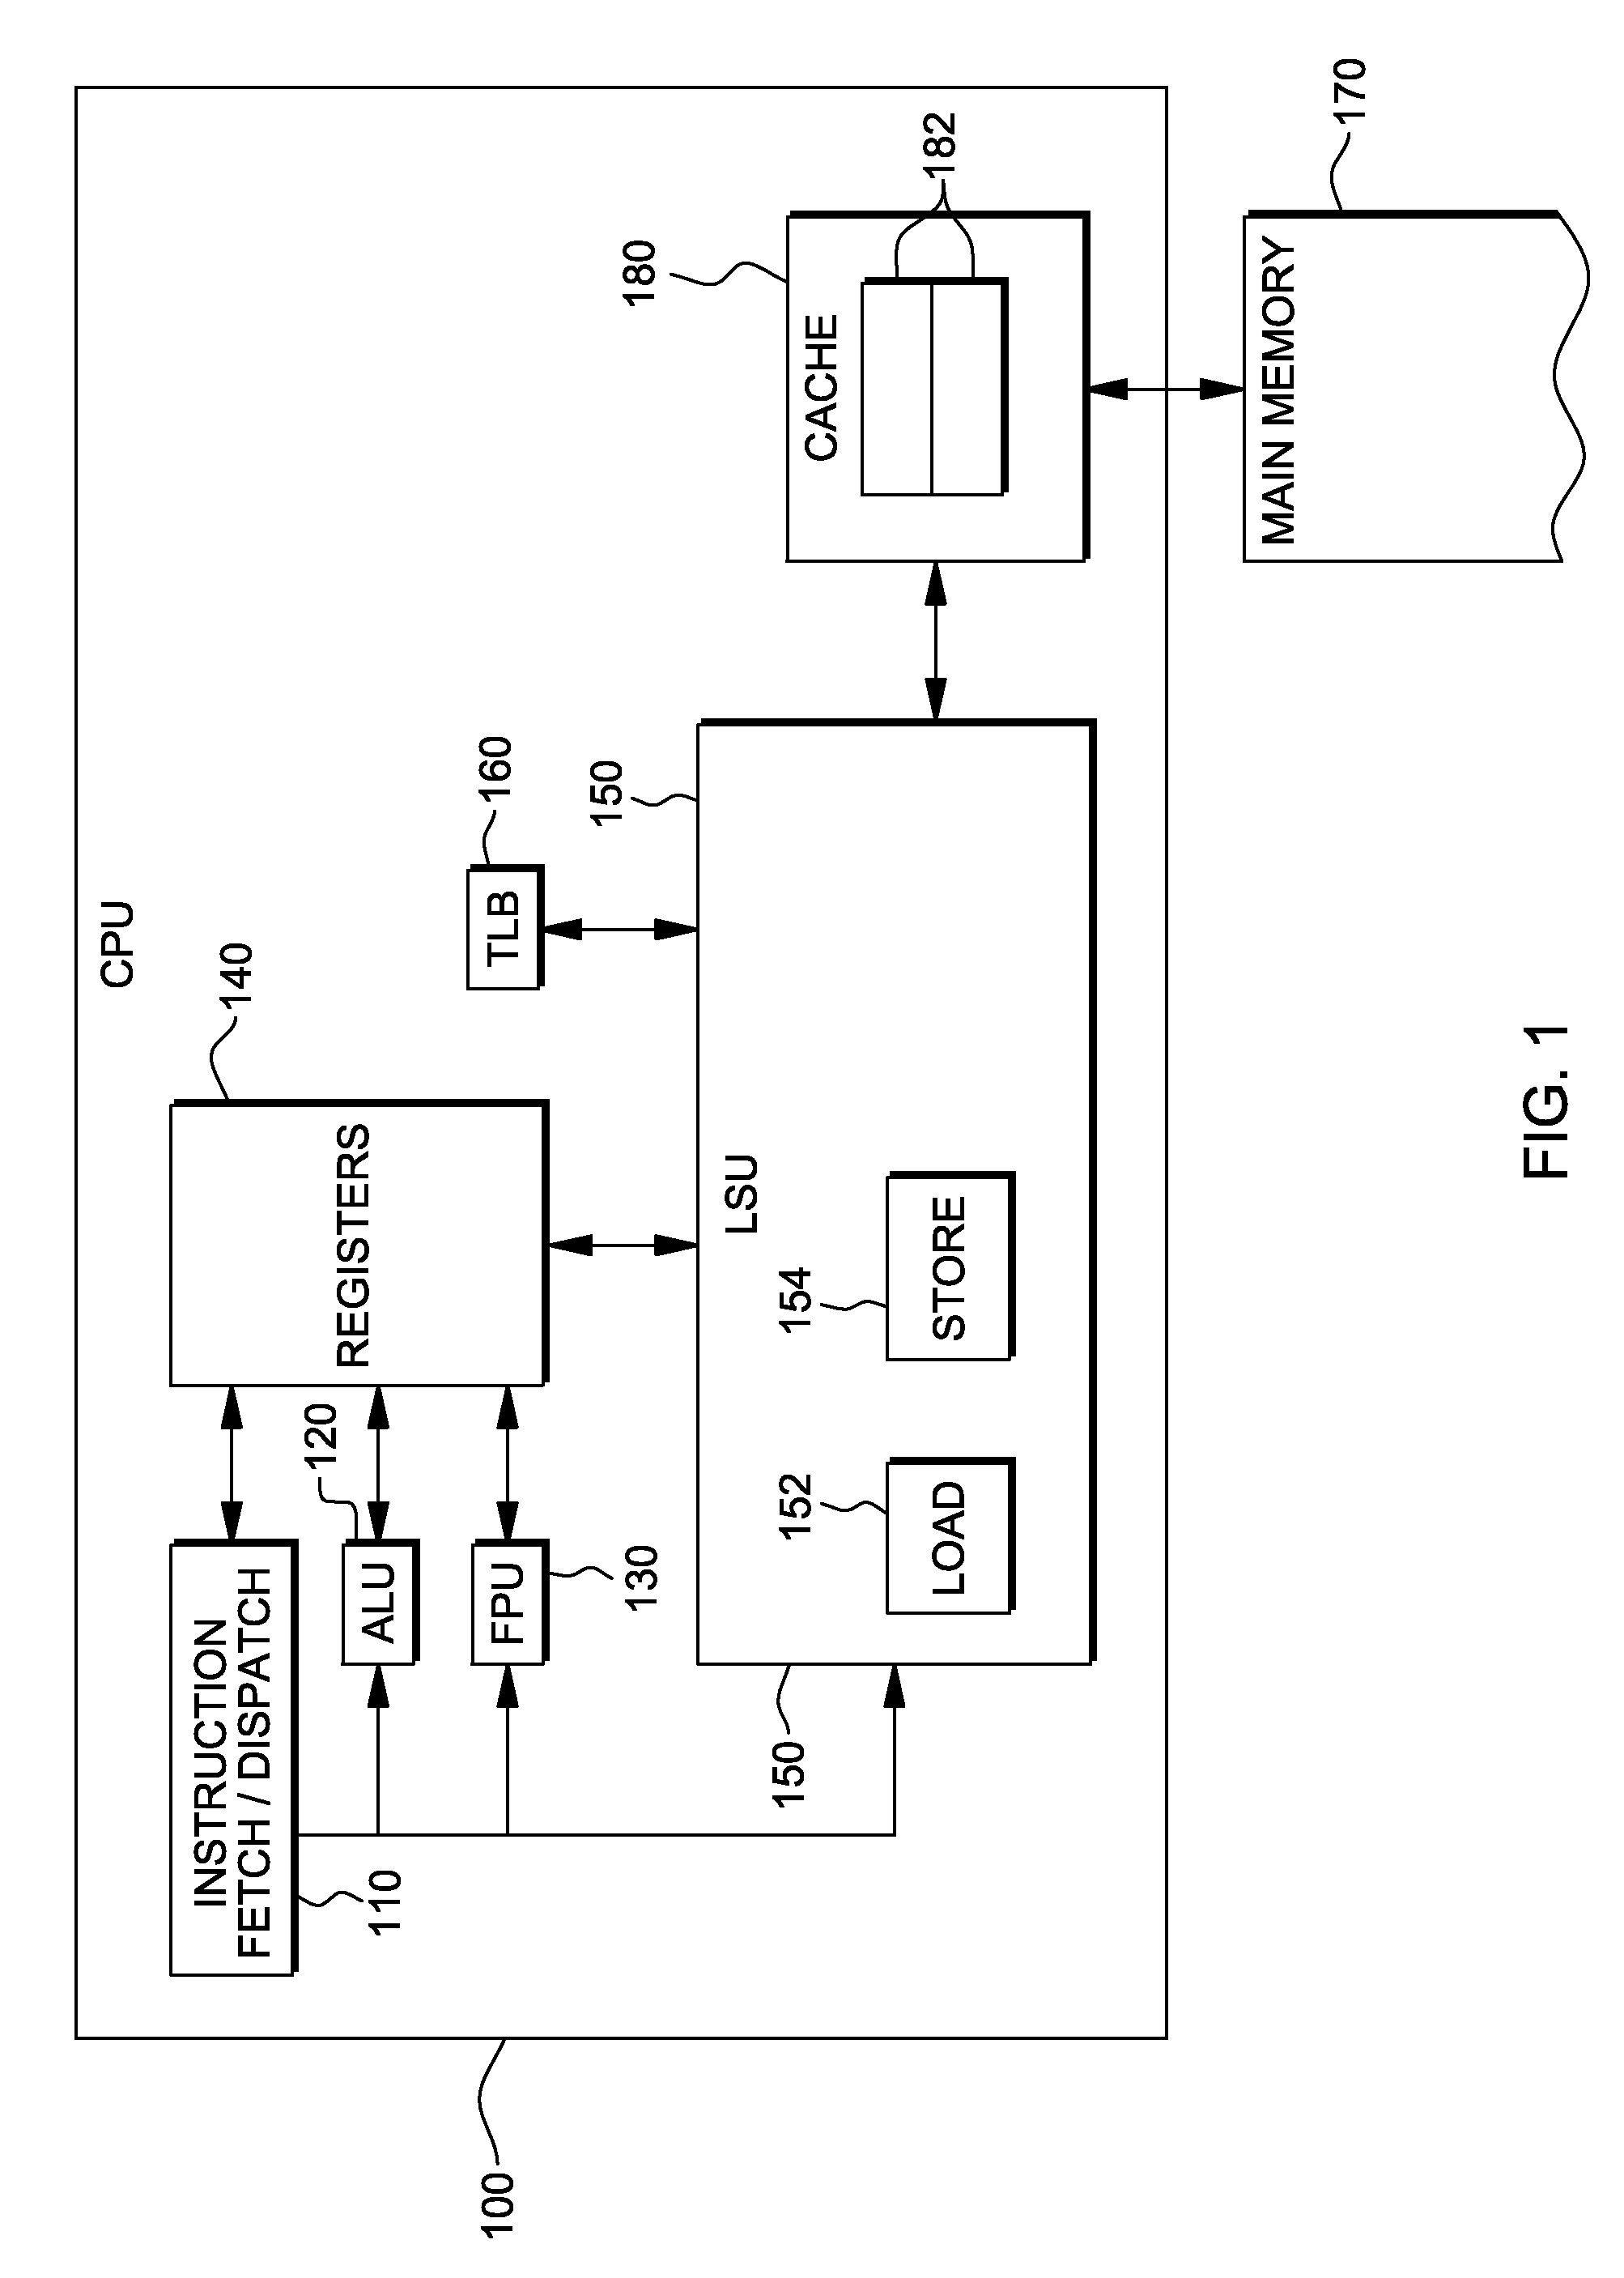 Facilitating data coherency using in-memory tag bits and faulting stores